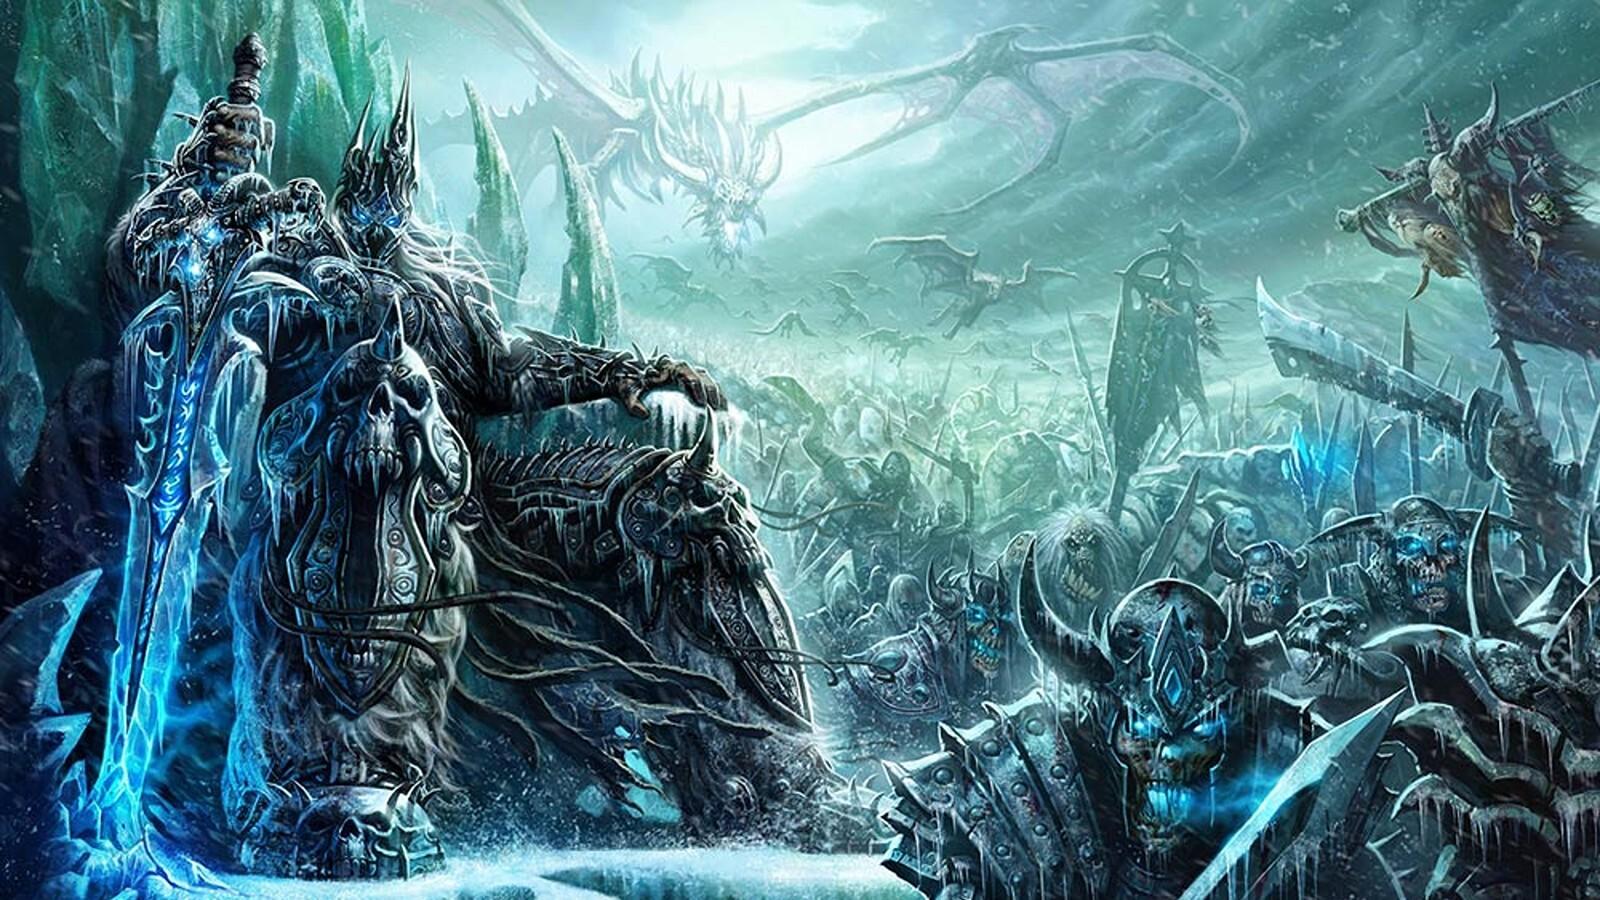 The Lich King before his horde of Death Knights in WoW